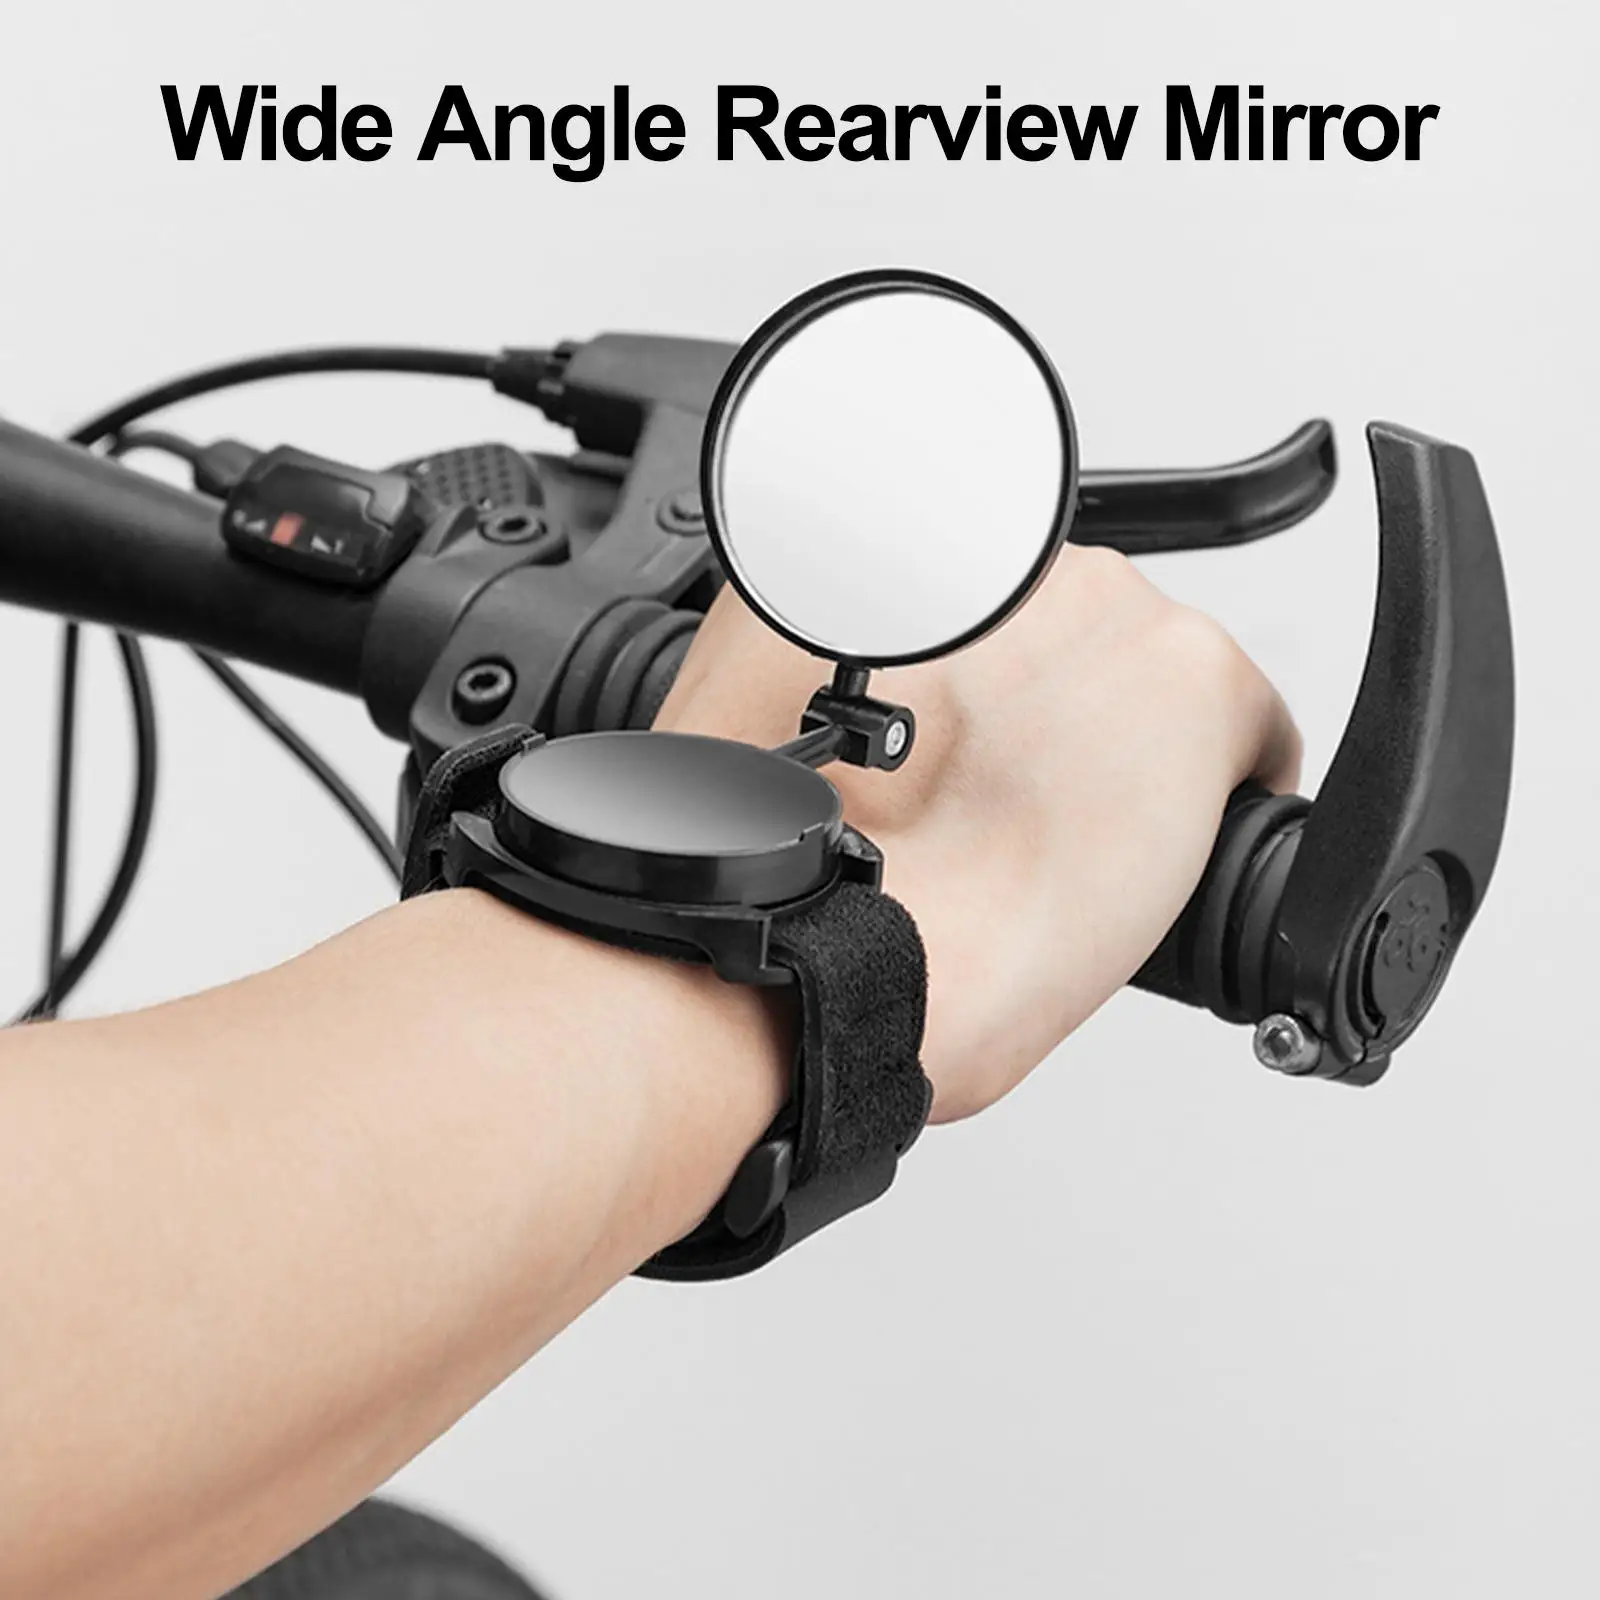 Rearview Mirror Wristband Rearview Mirror Widely Adjustable